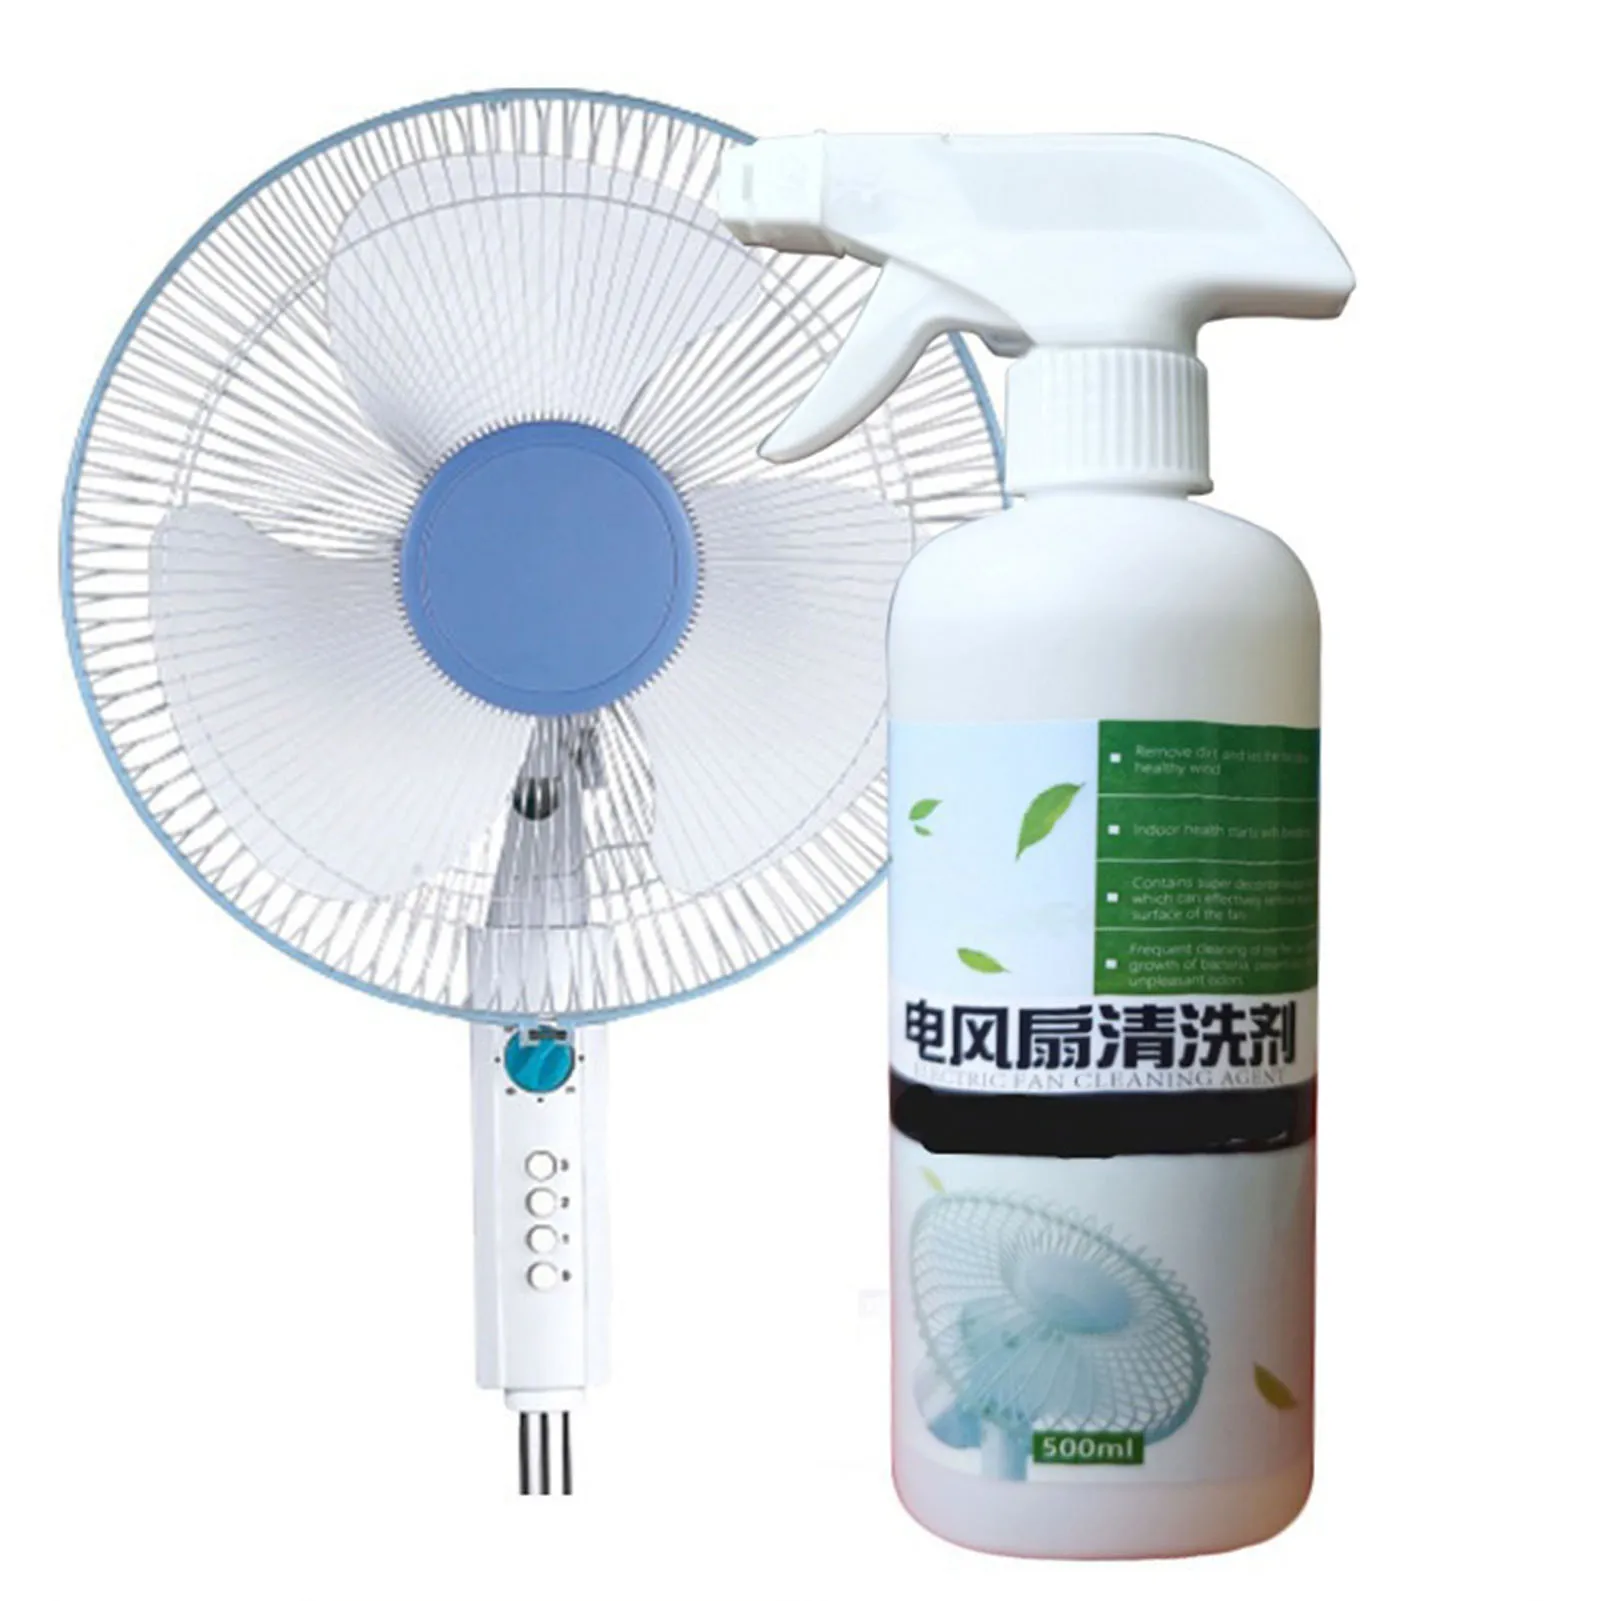 

500ml Air Conditioner Fan Foam Coil Cleaner Ceiling Fan Cleaning Artifact for Air Conditioner Filters Use